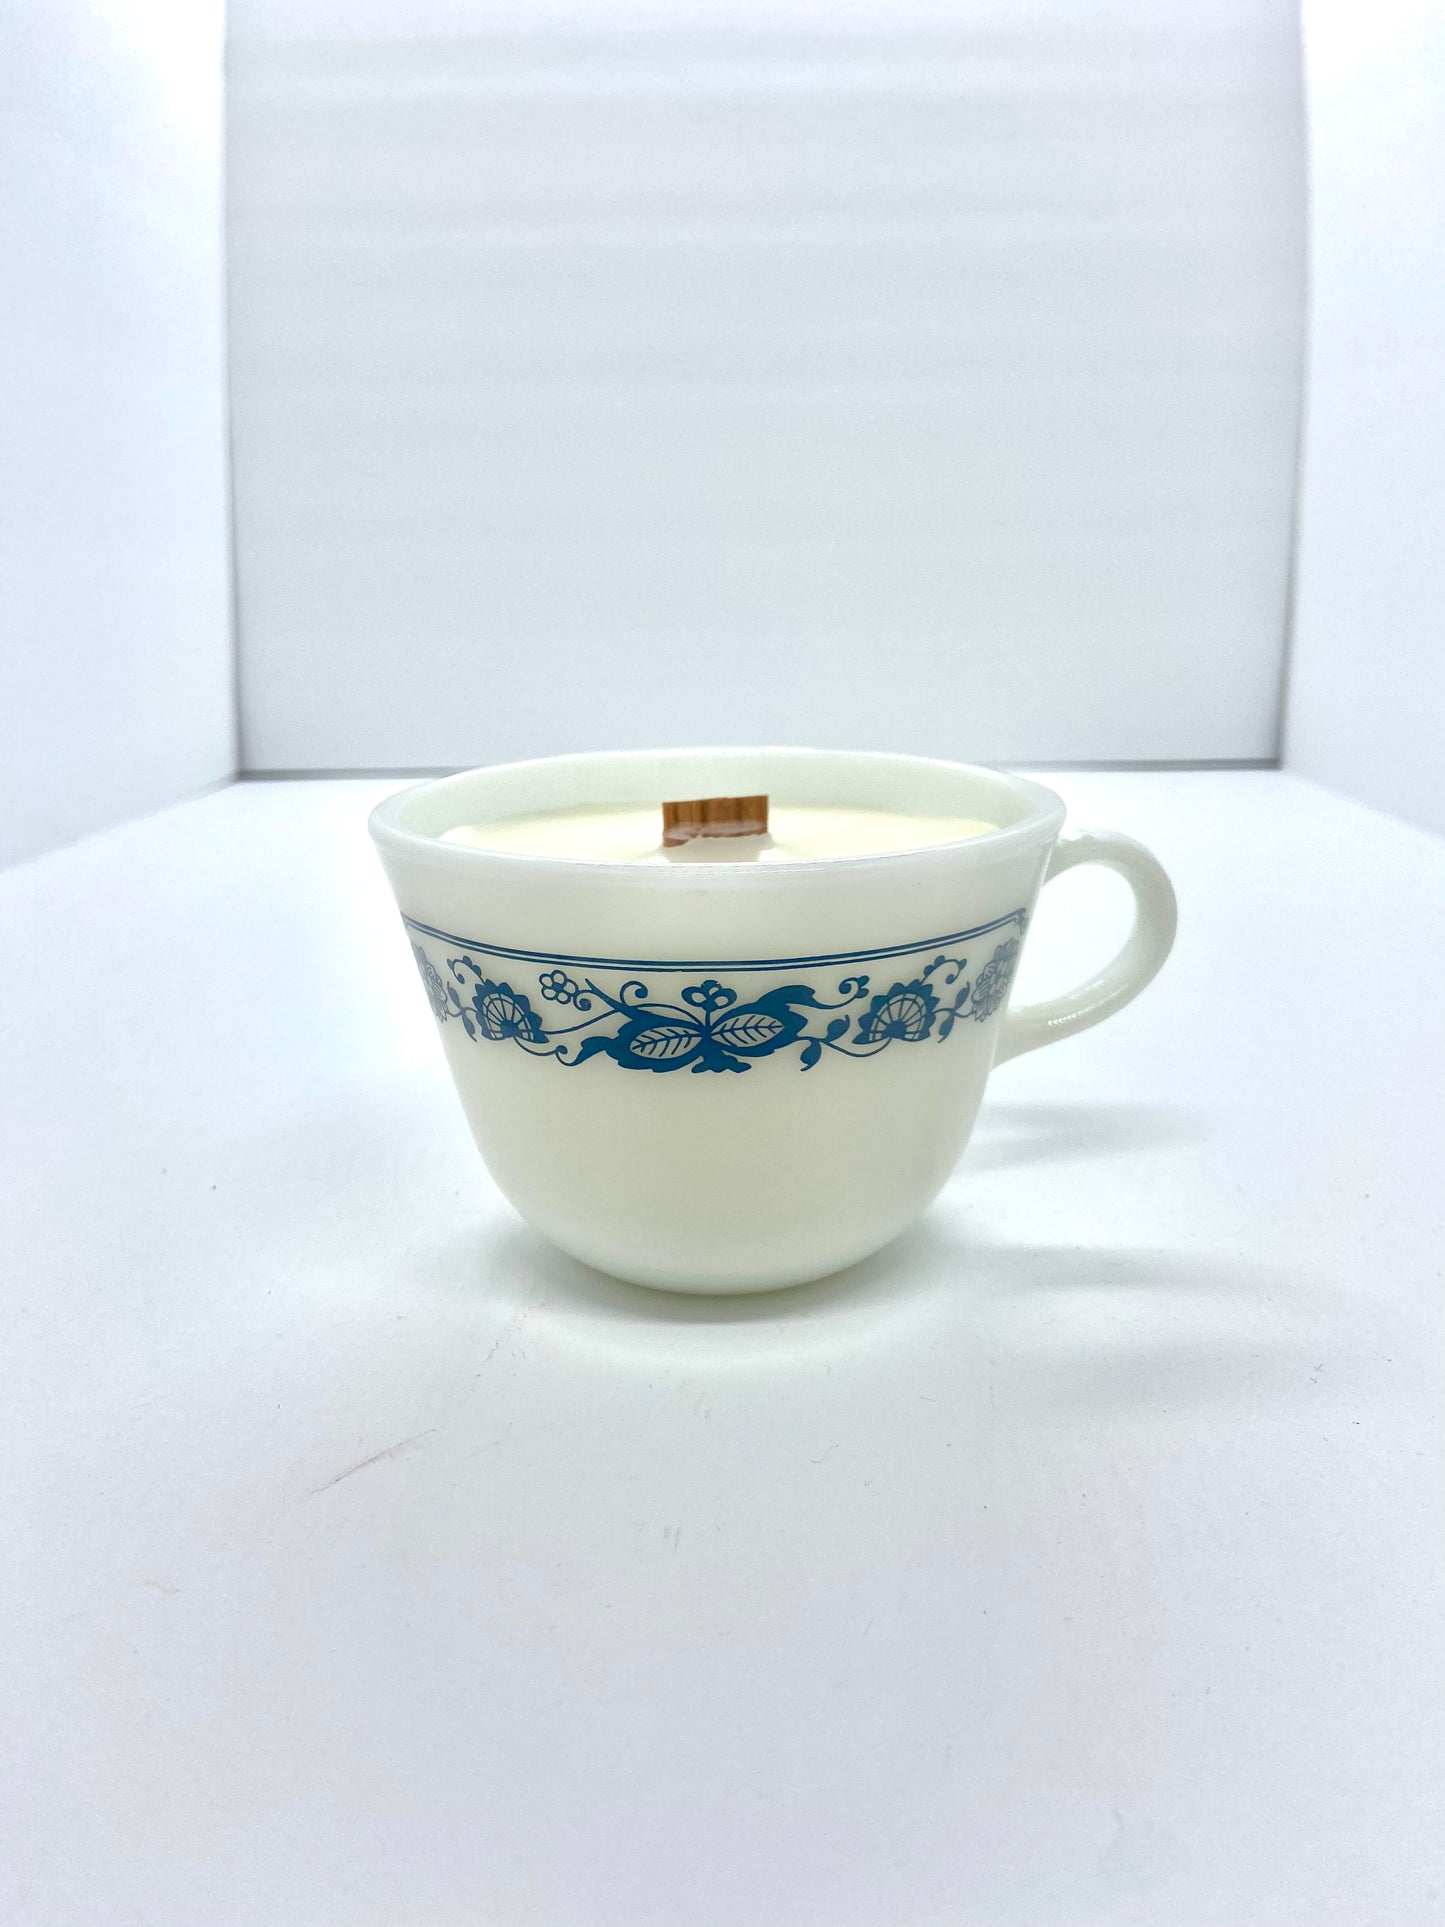 Vintage Pyrex Old Town Blue Tea Cup With 7oz Candle